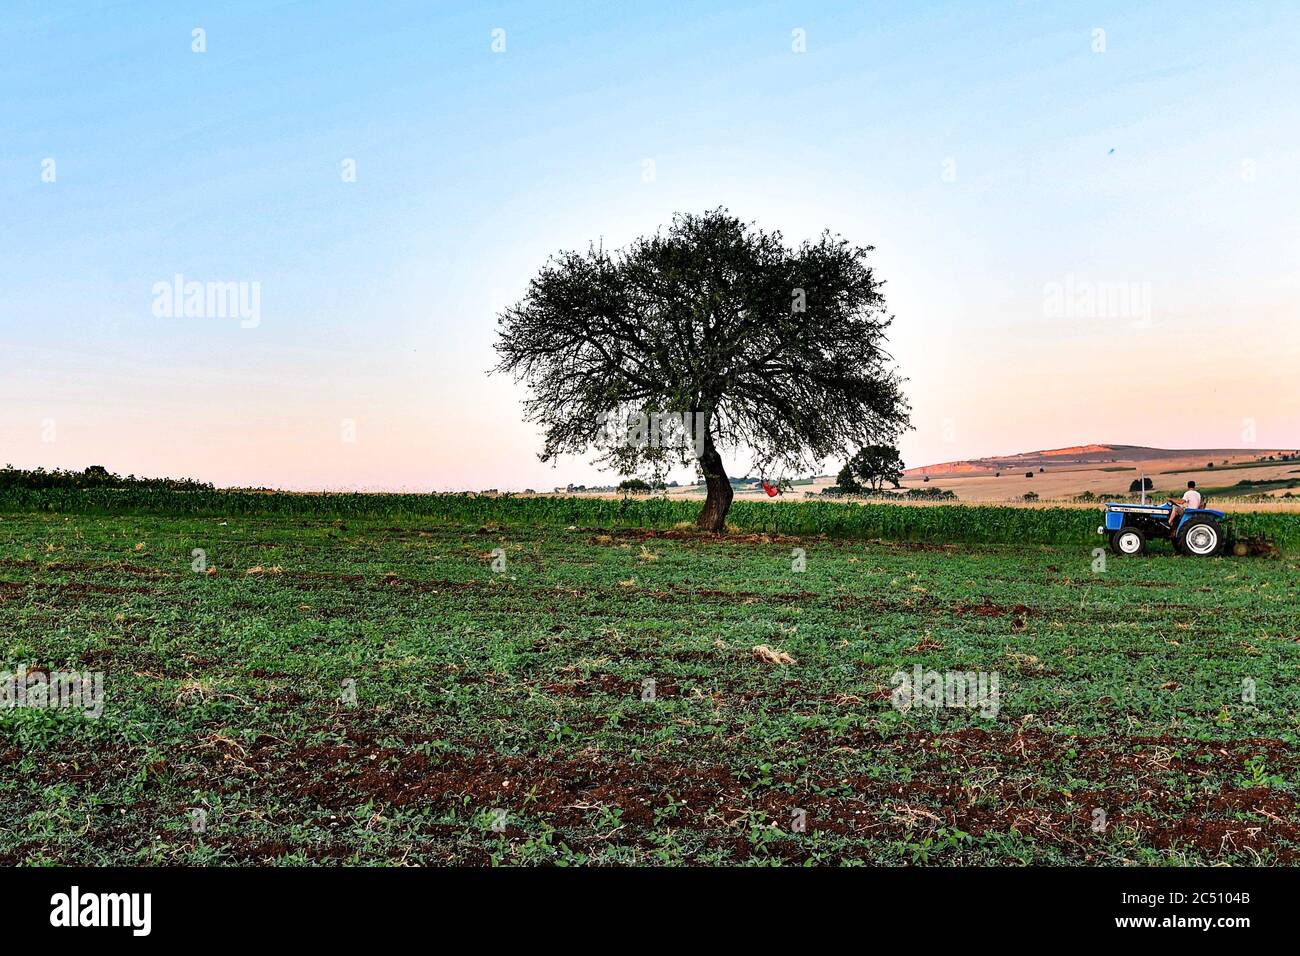 Kumanovo, North Macedonia. 29th June, 2020. A farmer plows a field at a village near Kumanovo, North Macedonia, on June 29, 2020. A heat wave hit North Macedonia on Monday and the temperature reached 38 degrees Celsius. Credit: Tomislav Georgiev/Xinhua/Alamy Live News Stock Photo